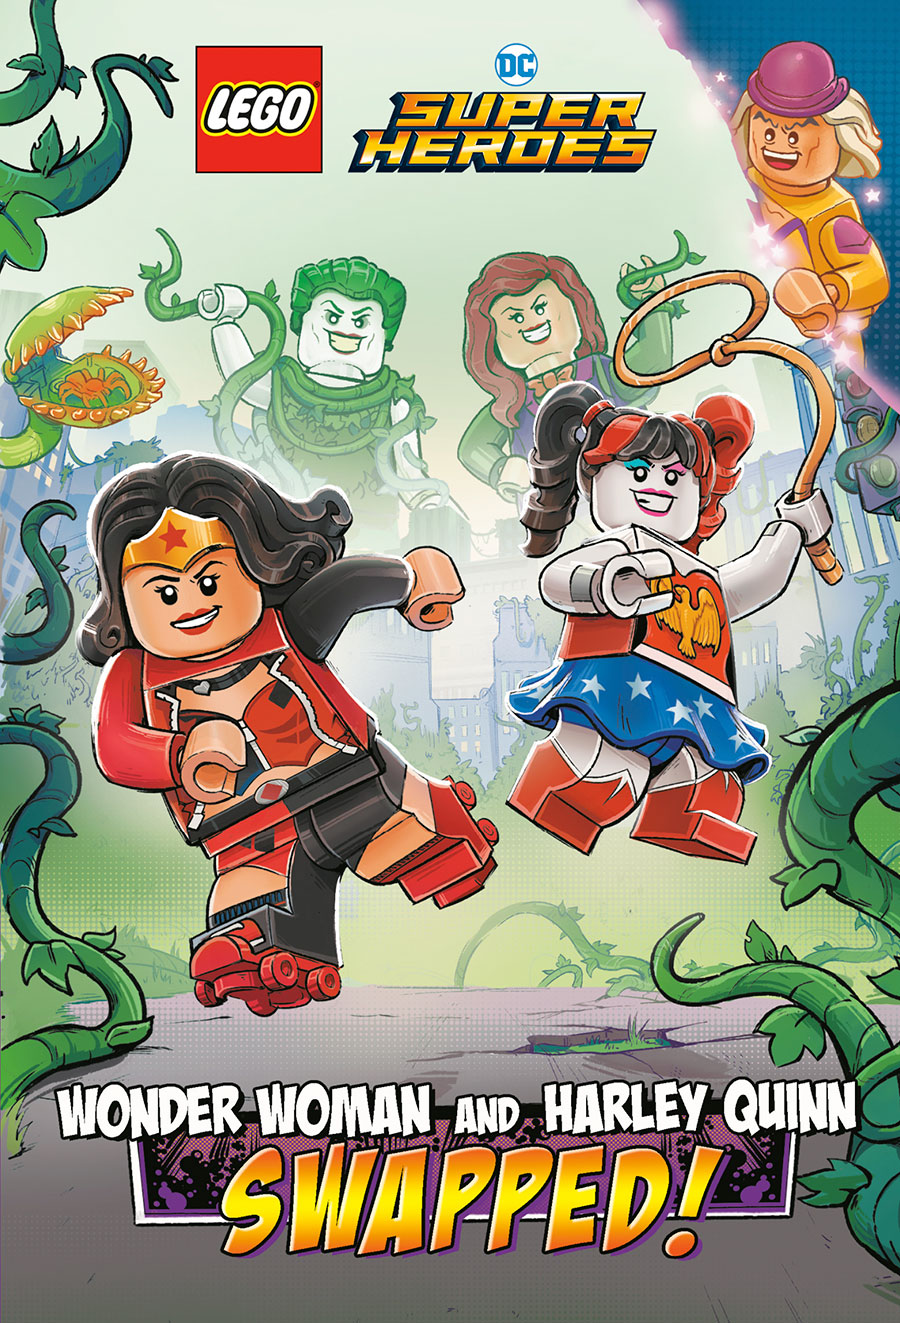 LEGO DC Comics Super Heroes Chapter Book Vol 2 Wonder Woman And Harley Quinn SWAPPED TP